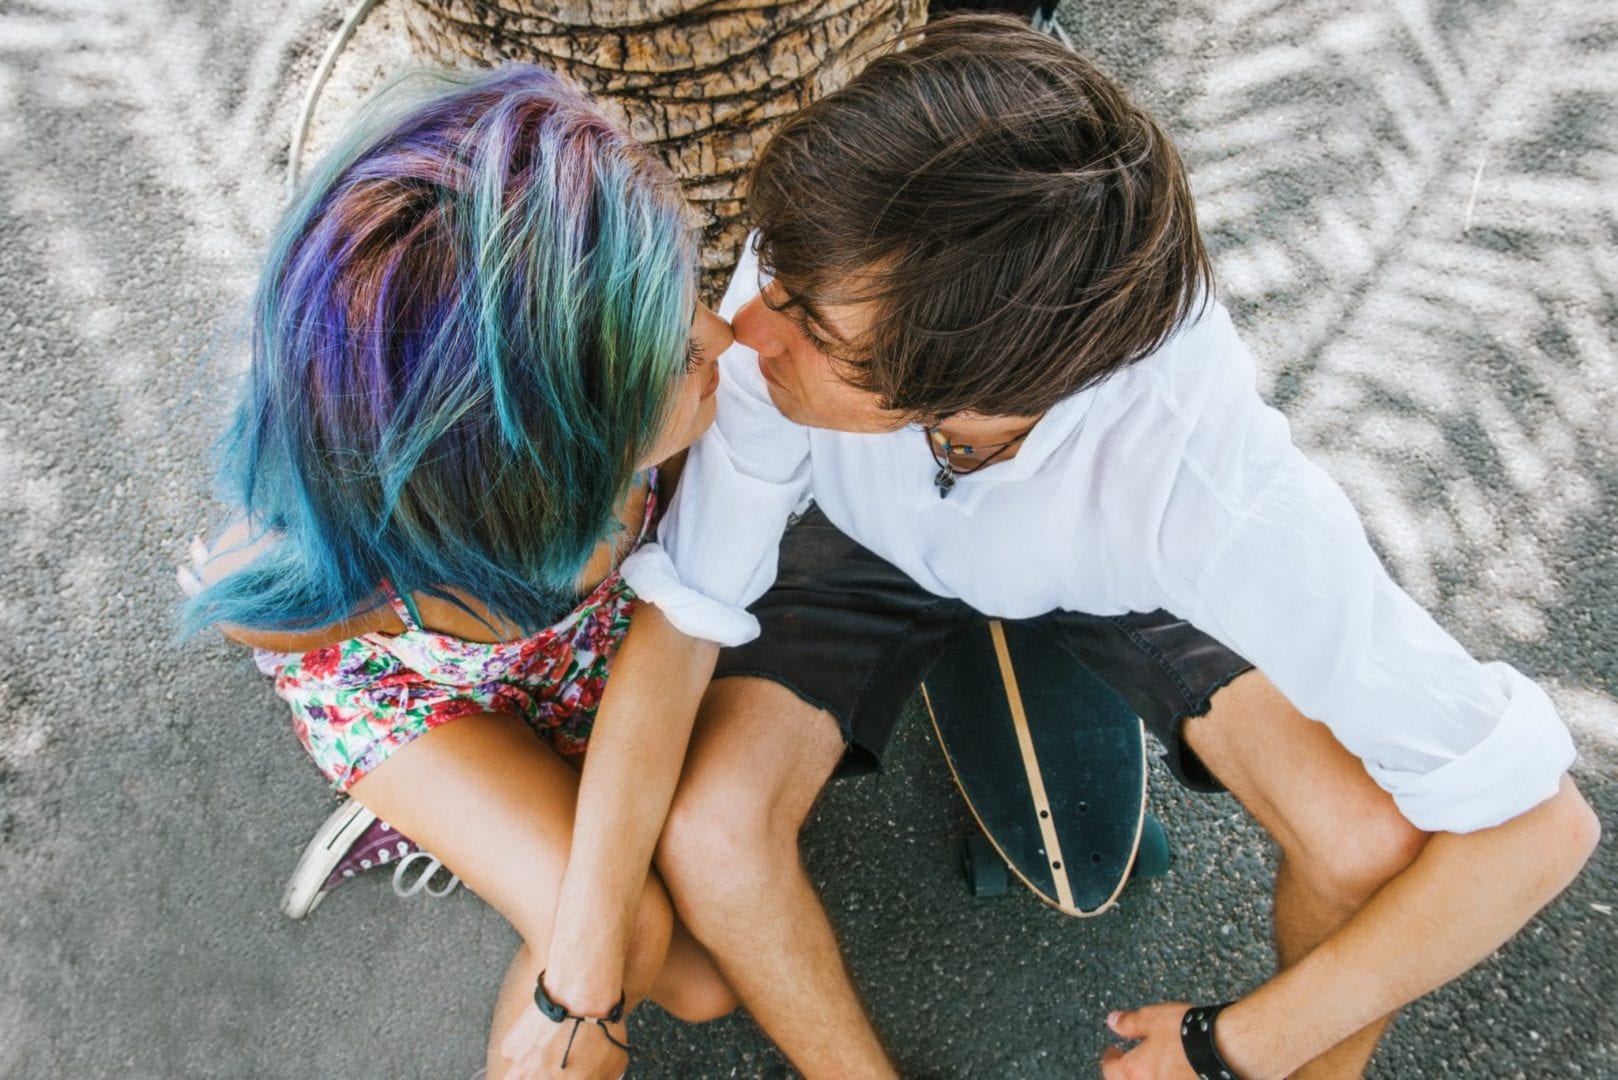 Teenage Dating 8 Words Youll Want To Know The Meaning Of Teen